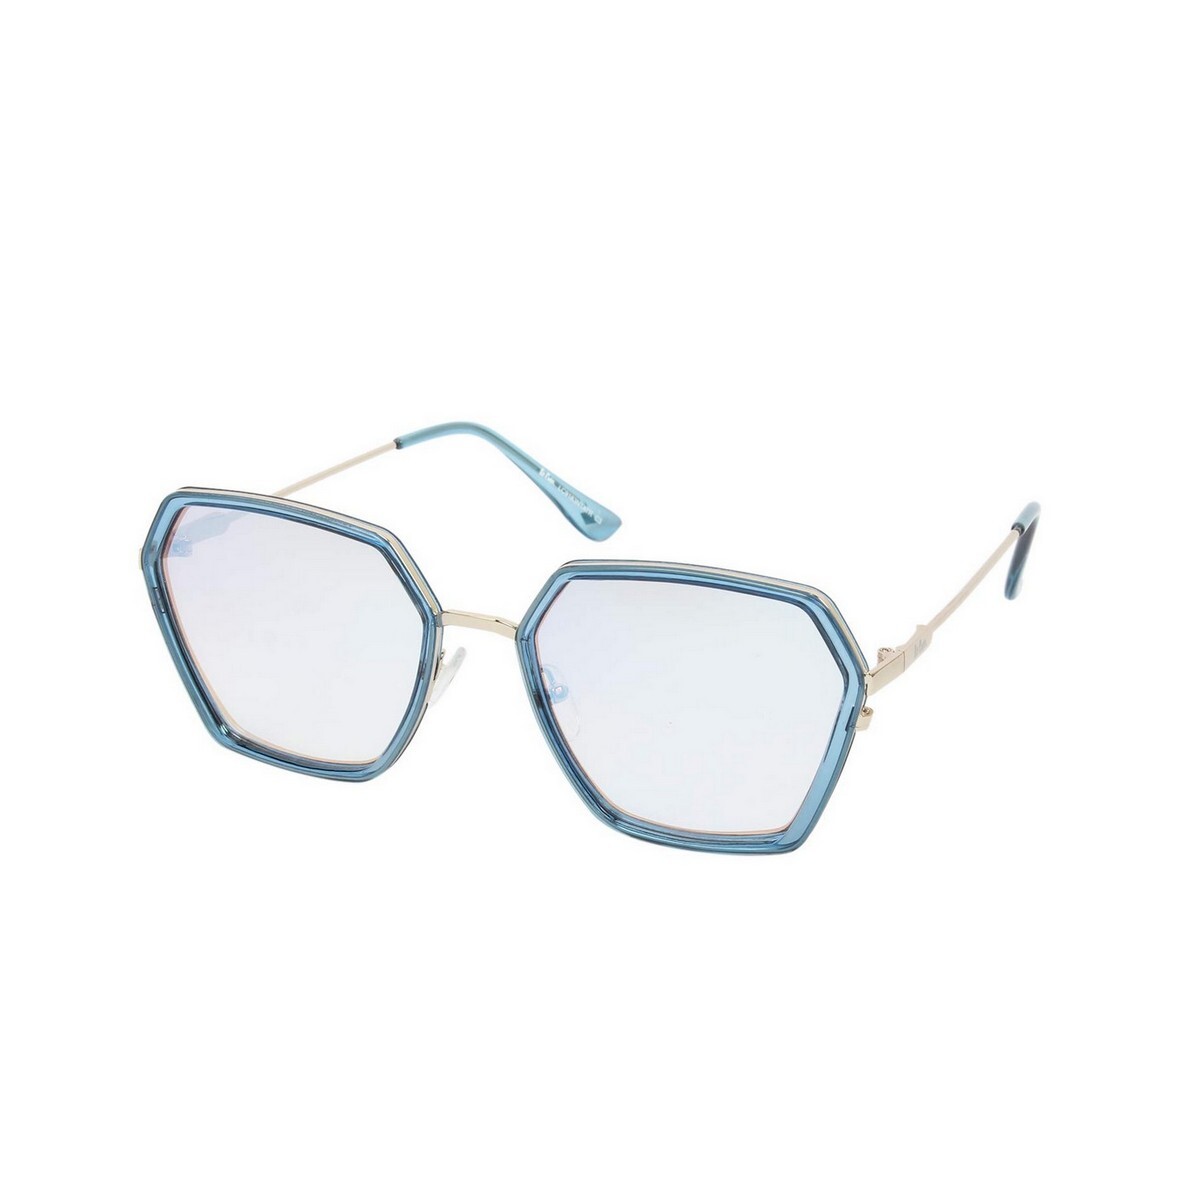 Lee Cooper Female Blue Frame With Silver Lens Sunglass